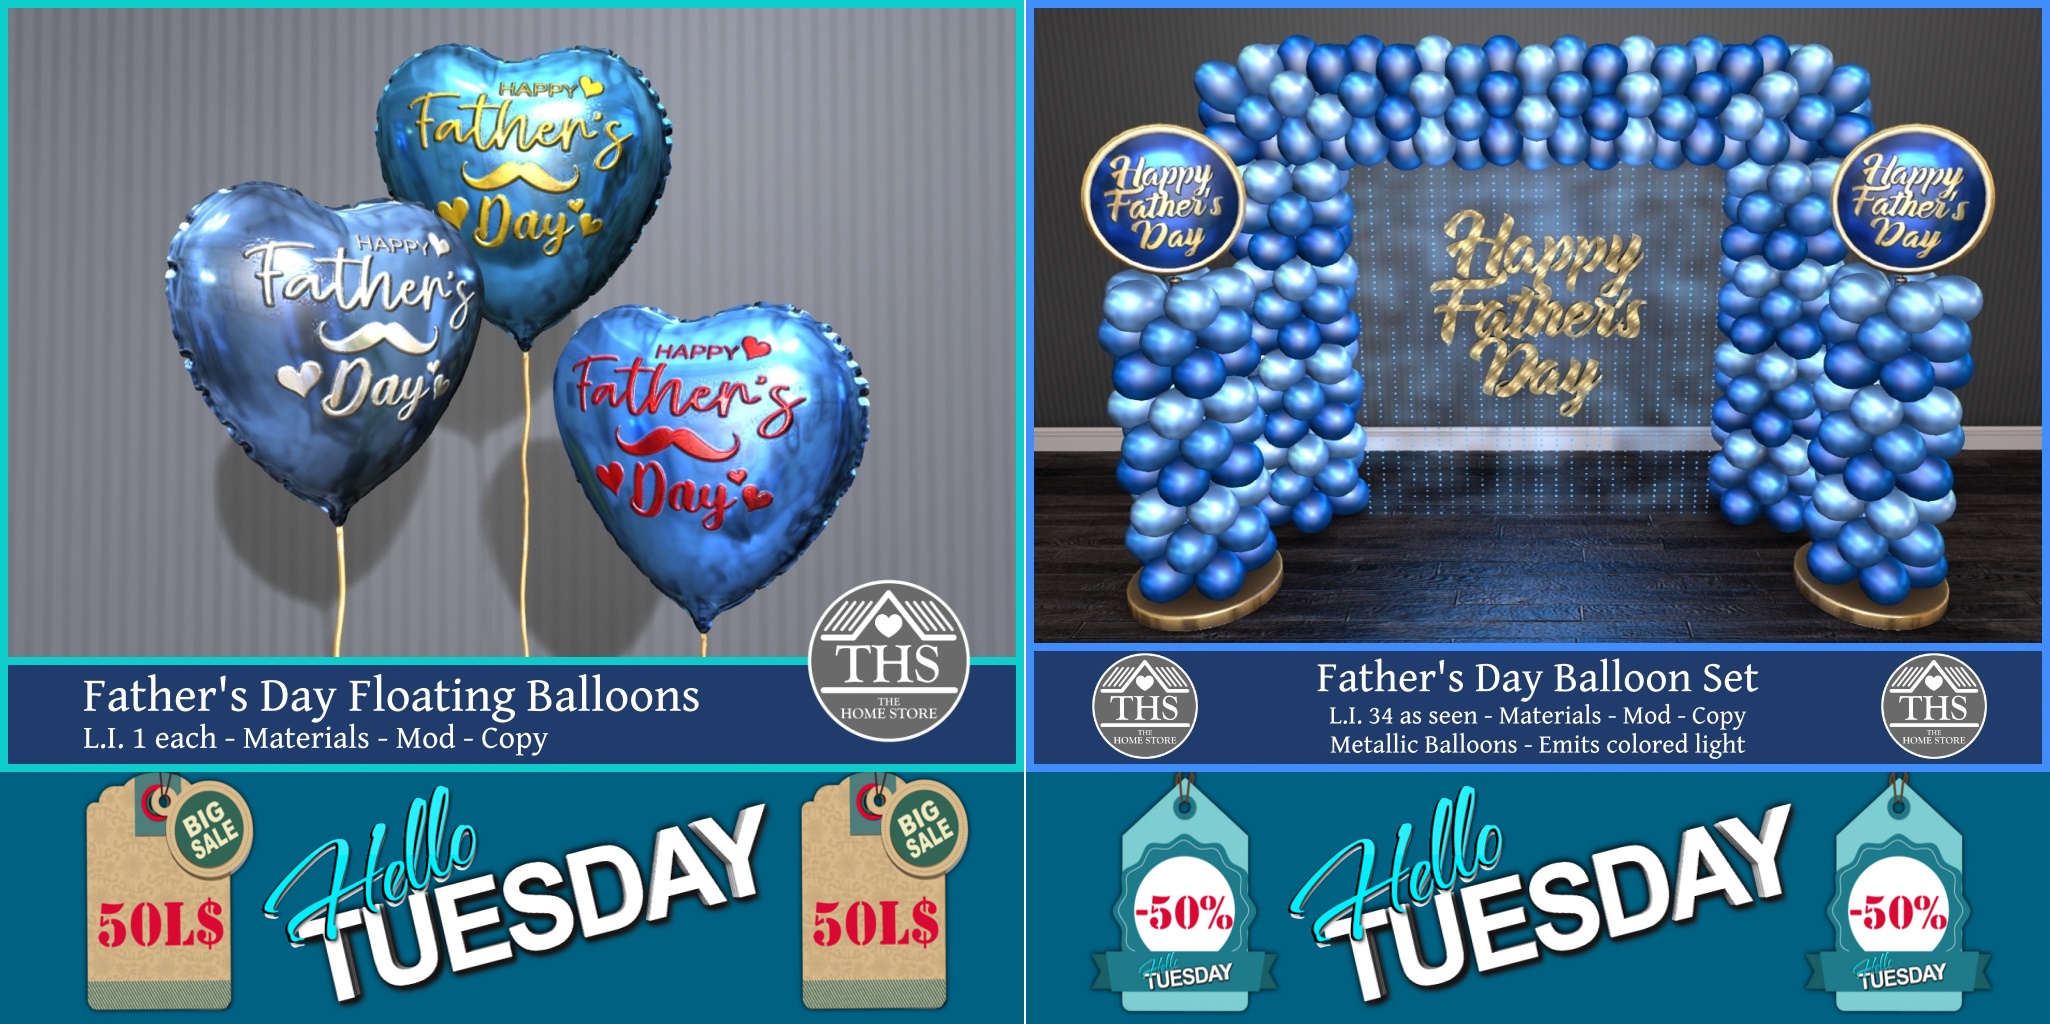 The Home Store – Father’s Day Floating Balloons & Balloon Set